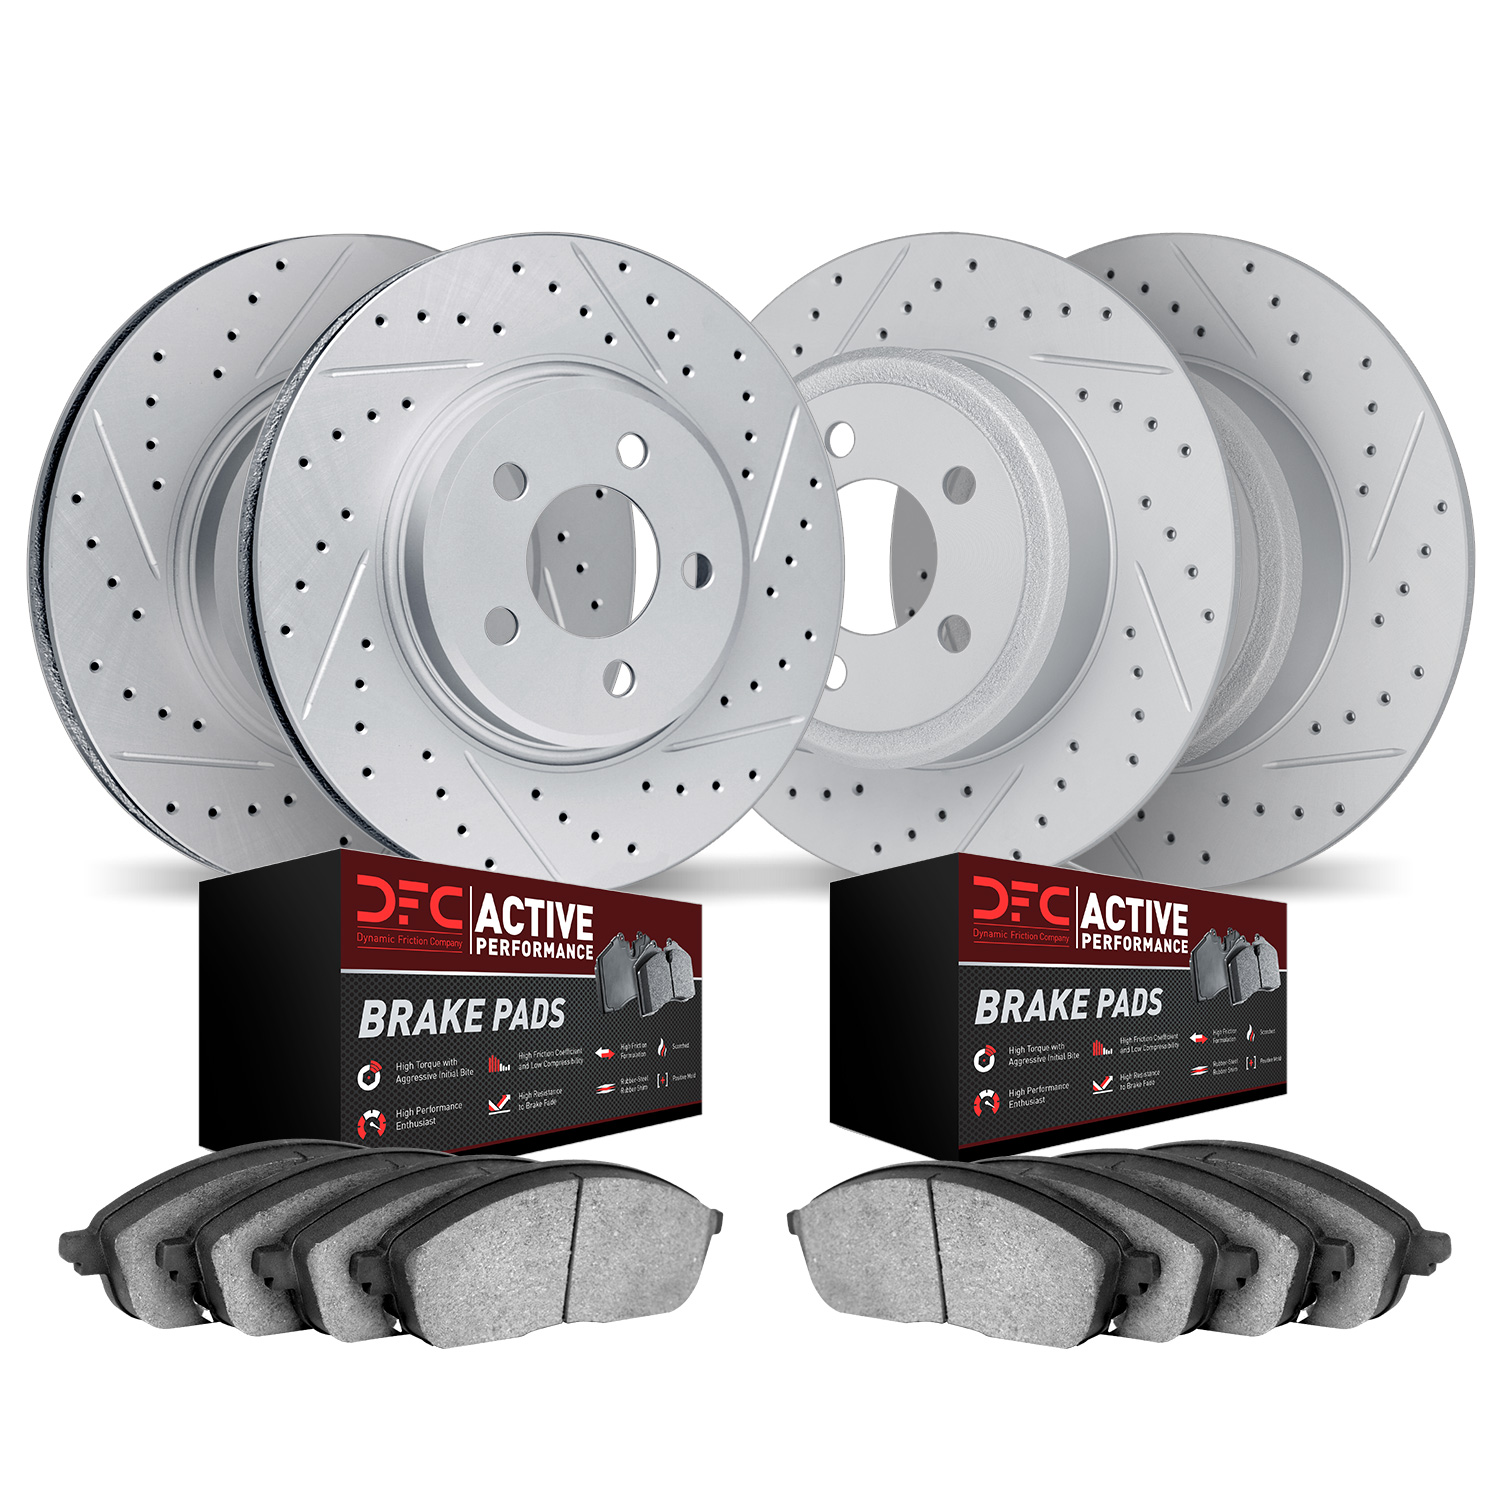 2704-13084 Geoperformance Drilled/Slotted Brake Rotors with Active Performance Pads Kit, 2001-2001 Subaru, Position: Front and R